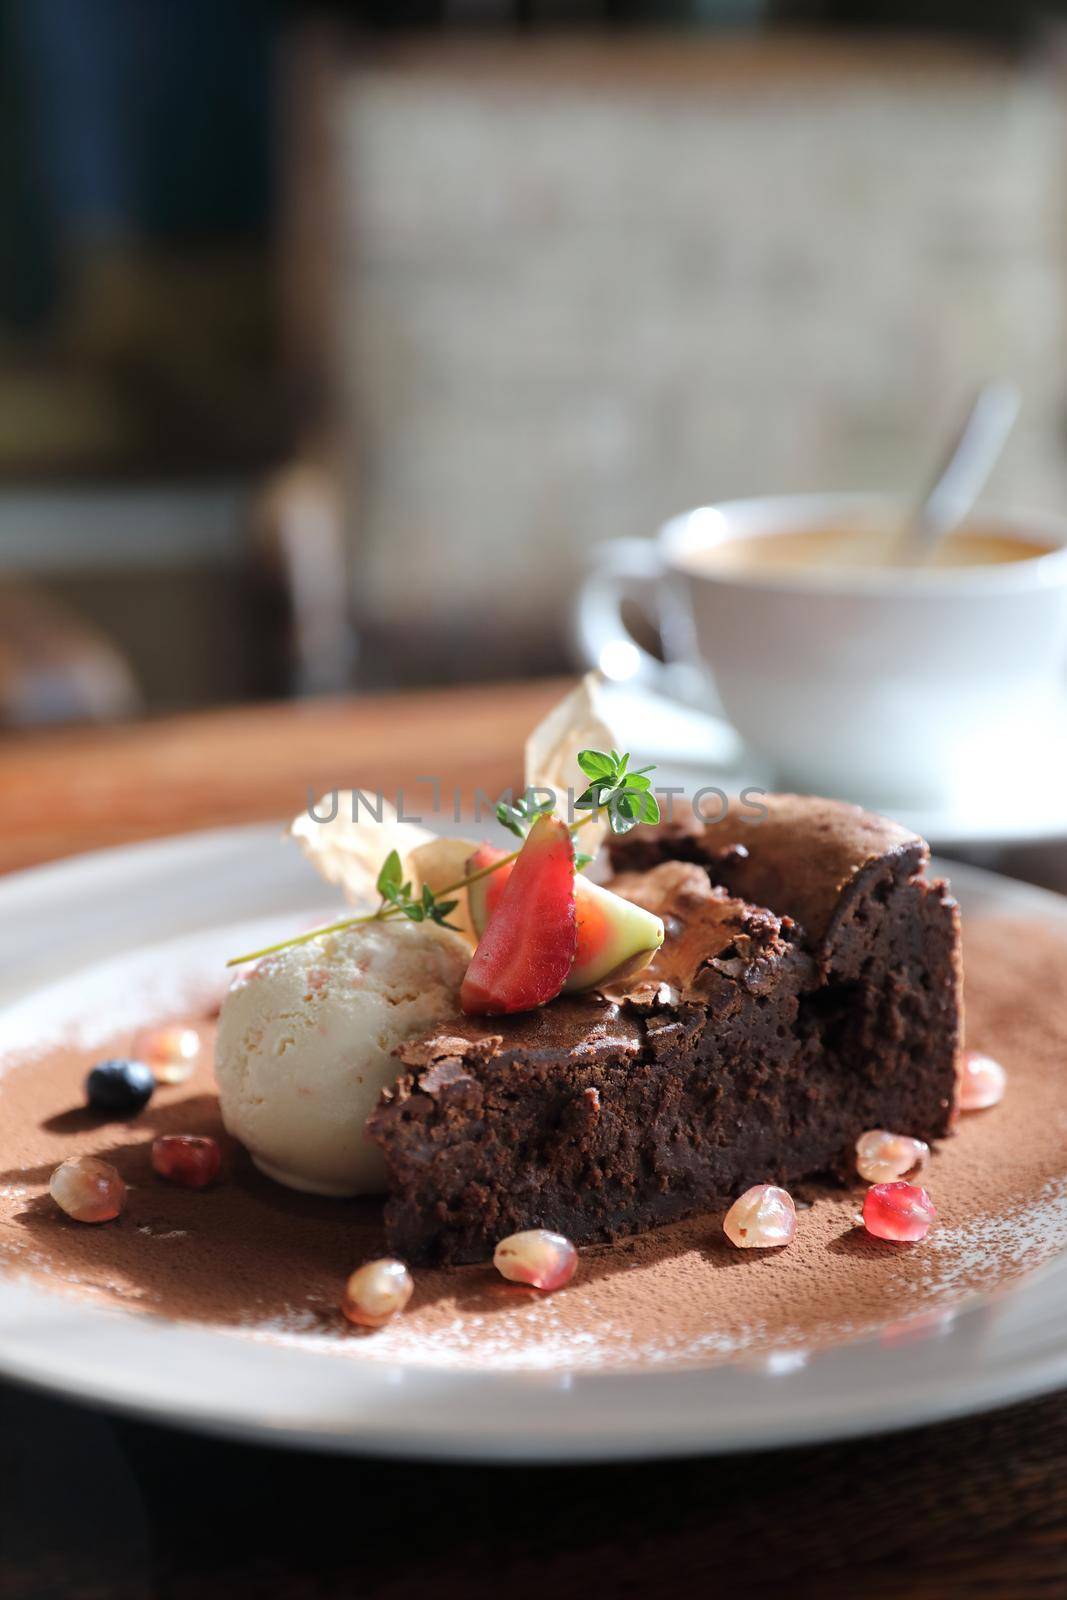 Chocolate cake with ice cream and coffee dessert on wood table 